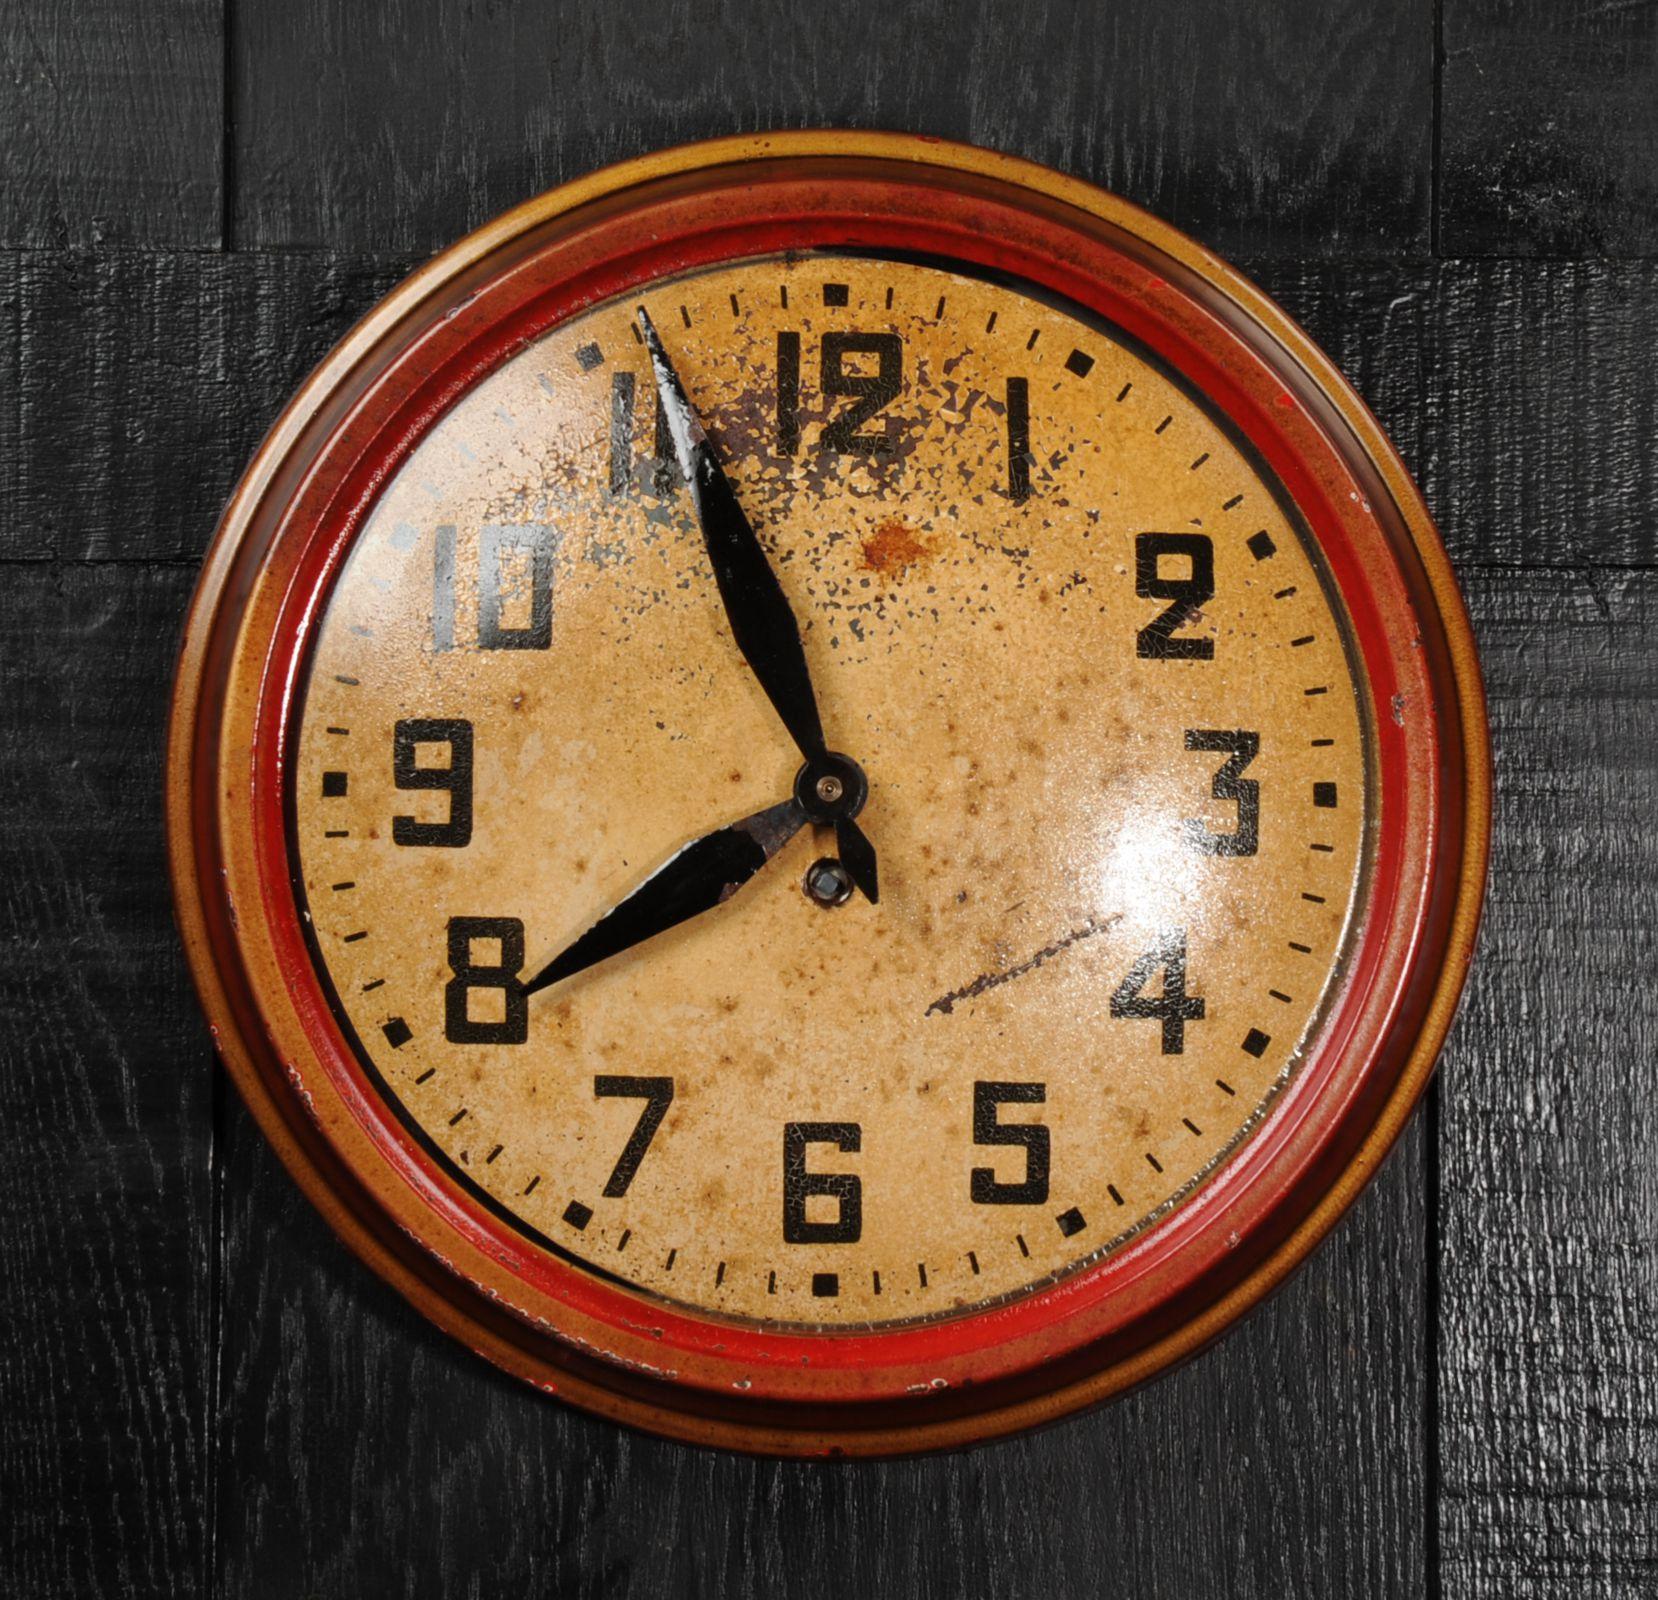 A wonderful early 20th century red and gold tole wall clock with a beautiful patination after years of neglect. The dark and light gold original finish has a wonderful craqueler and is speckled with rust. Originally a mechanical movement by the